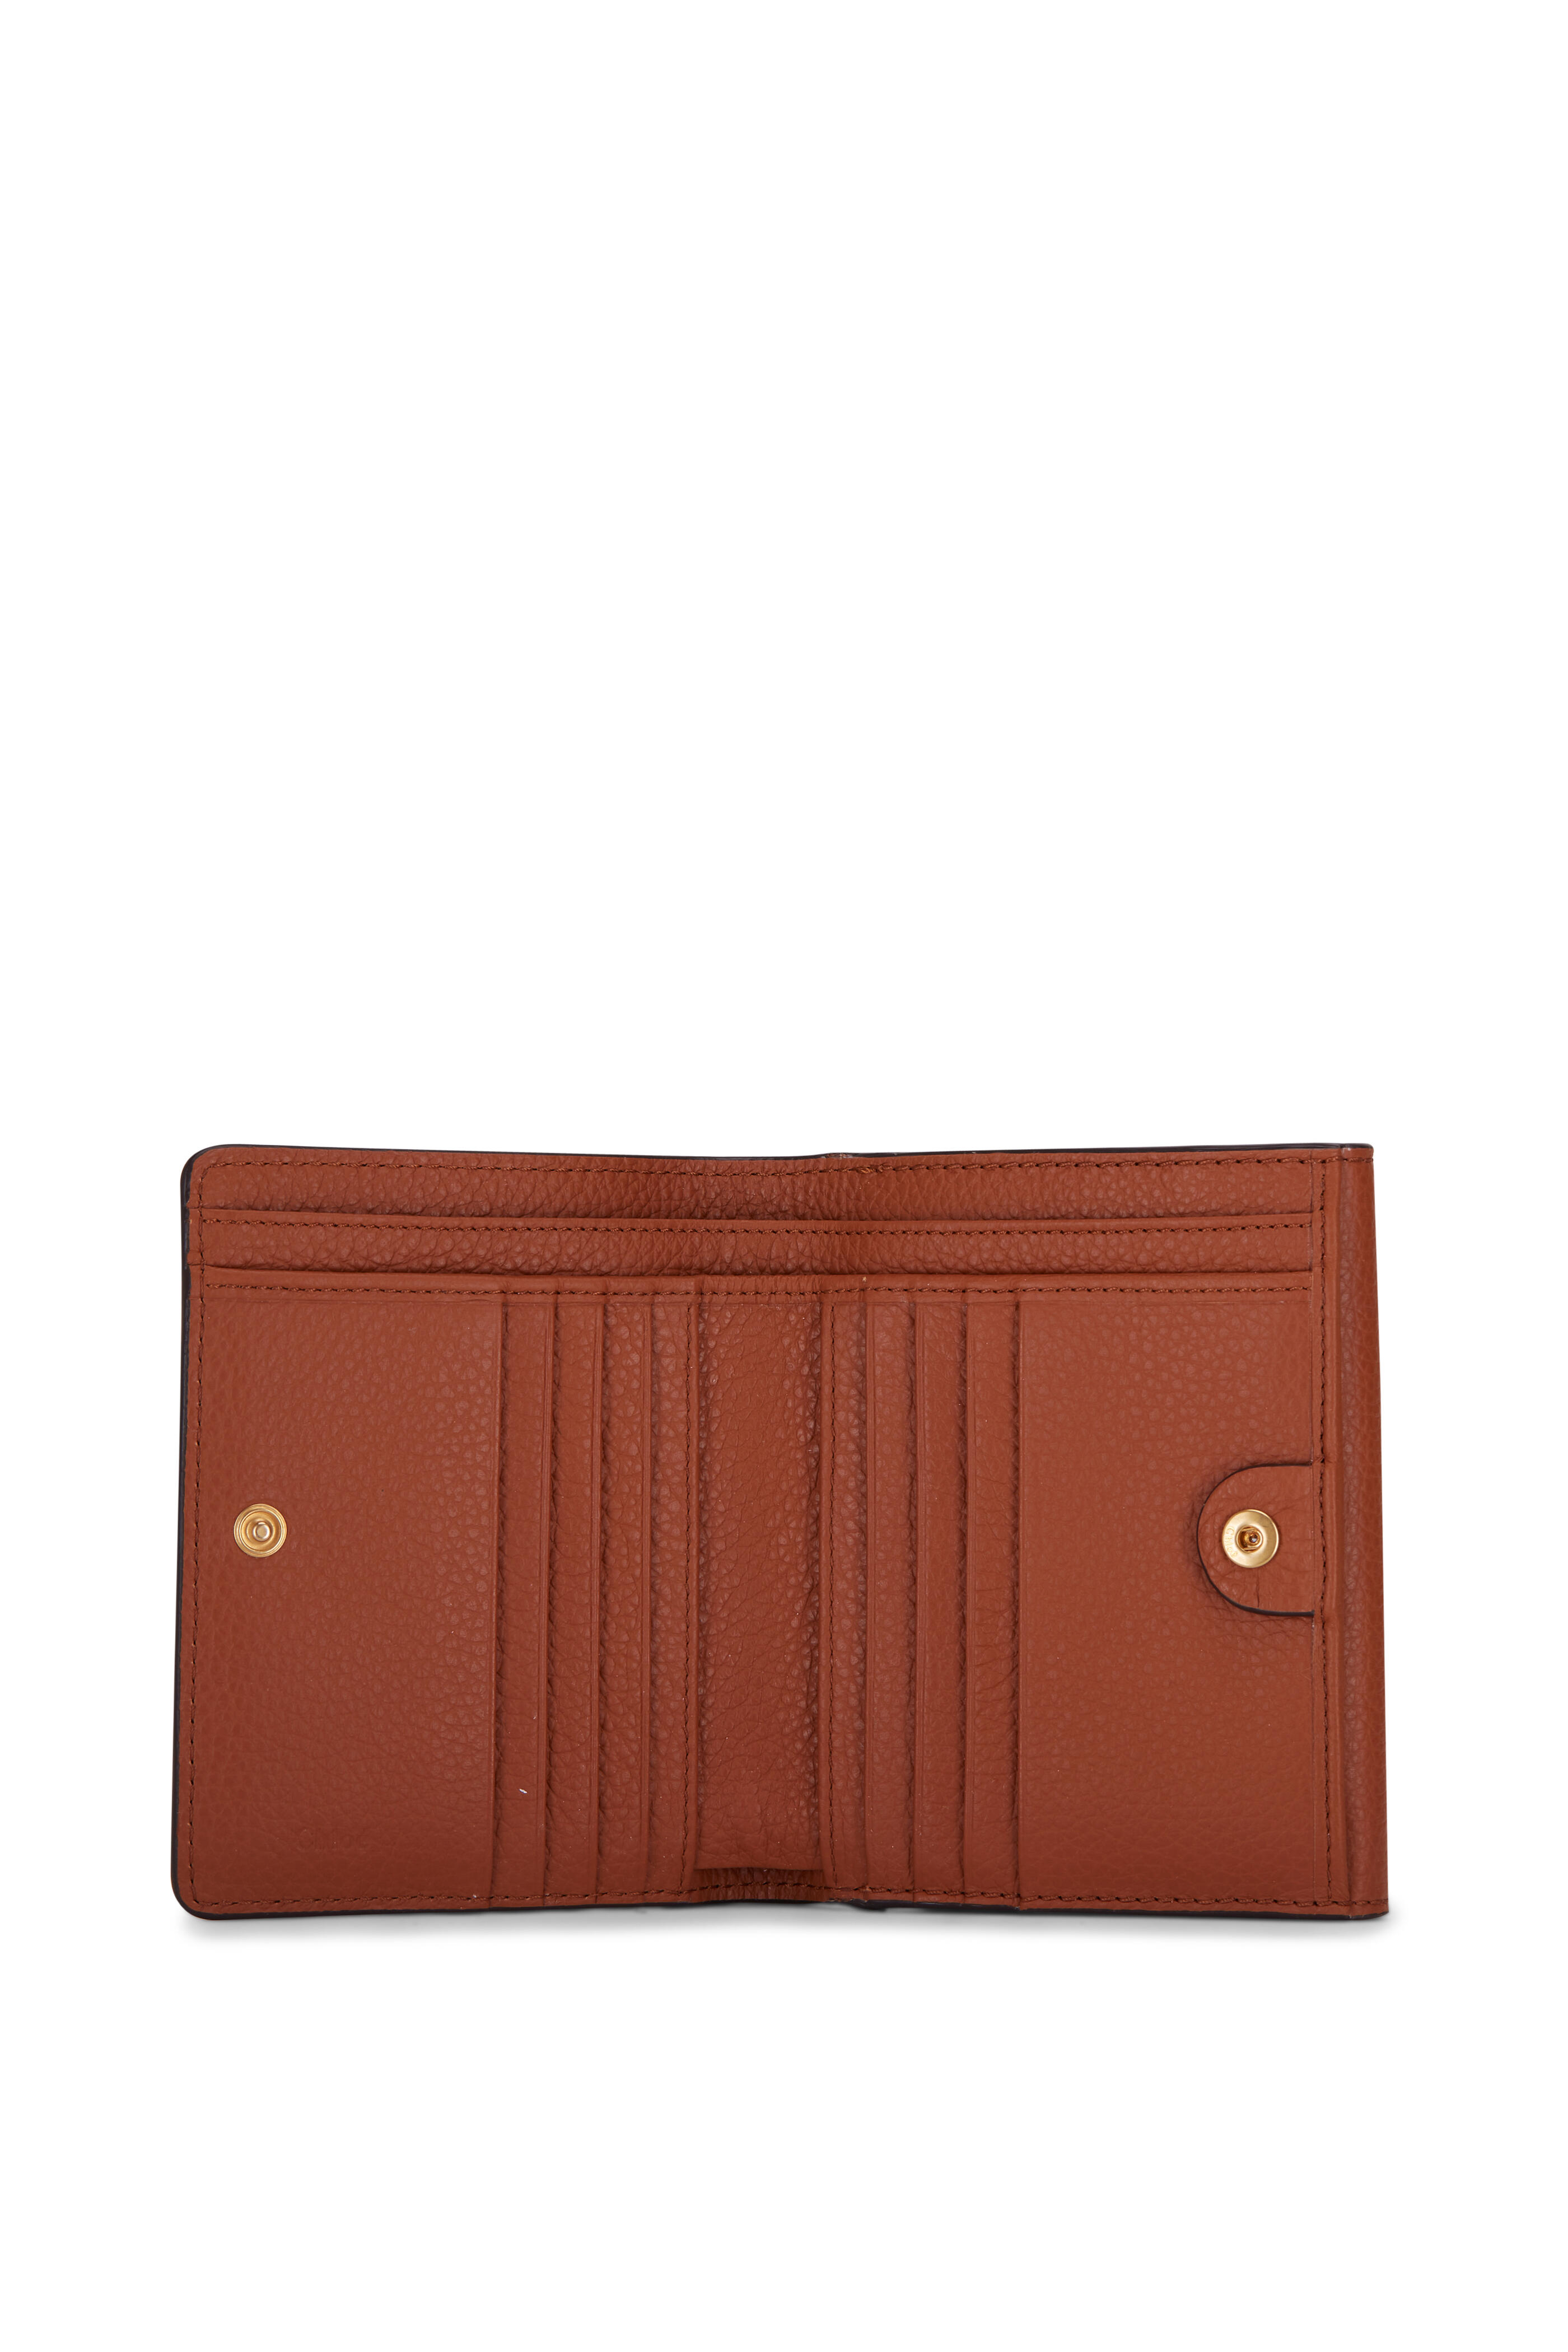 Chloé - Marcie Tan Leather Square Wallet | Mitchell Stores